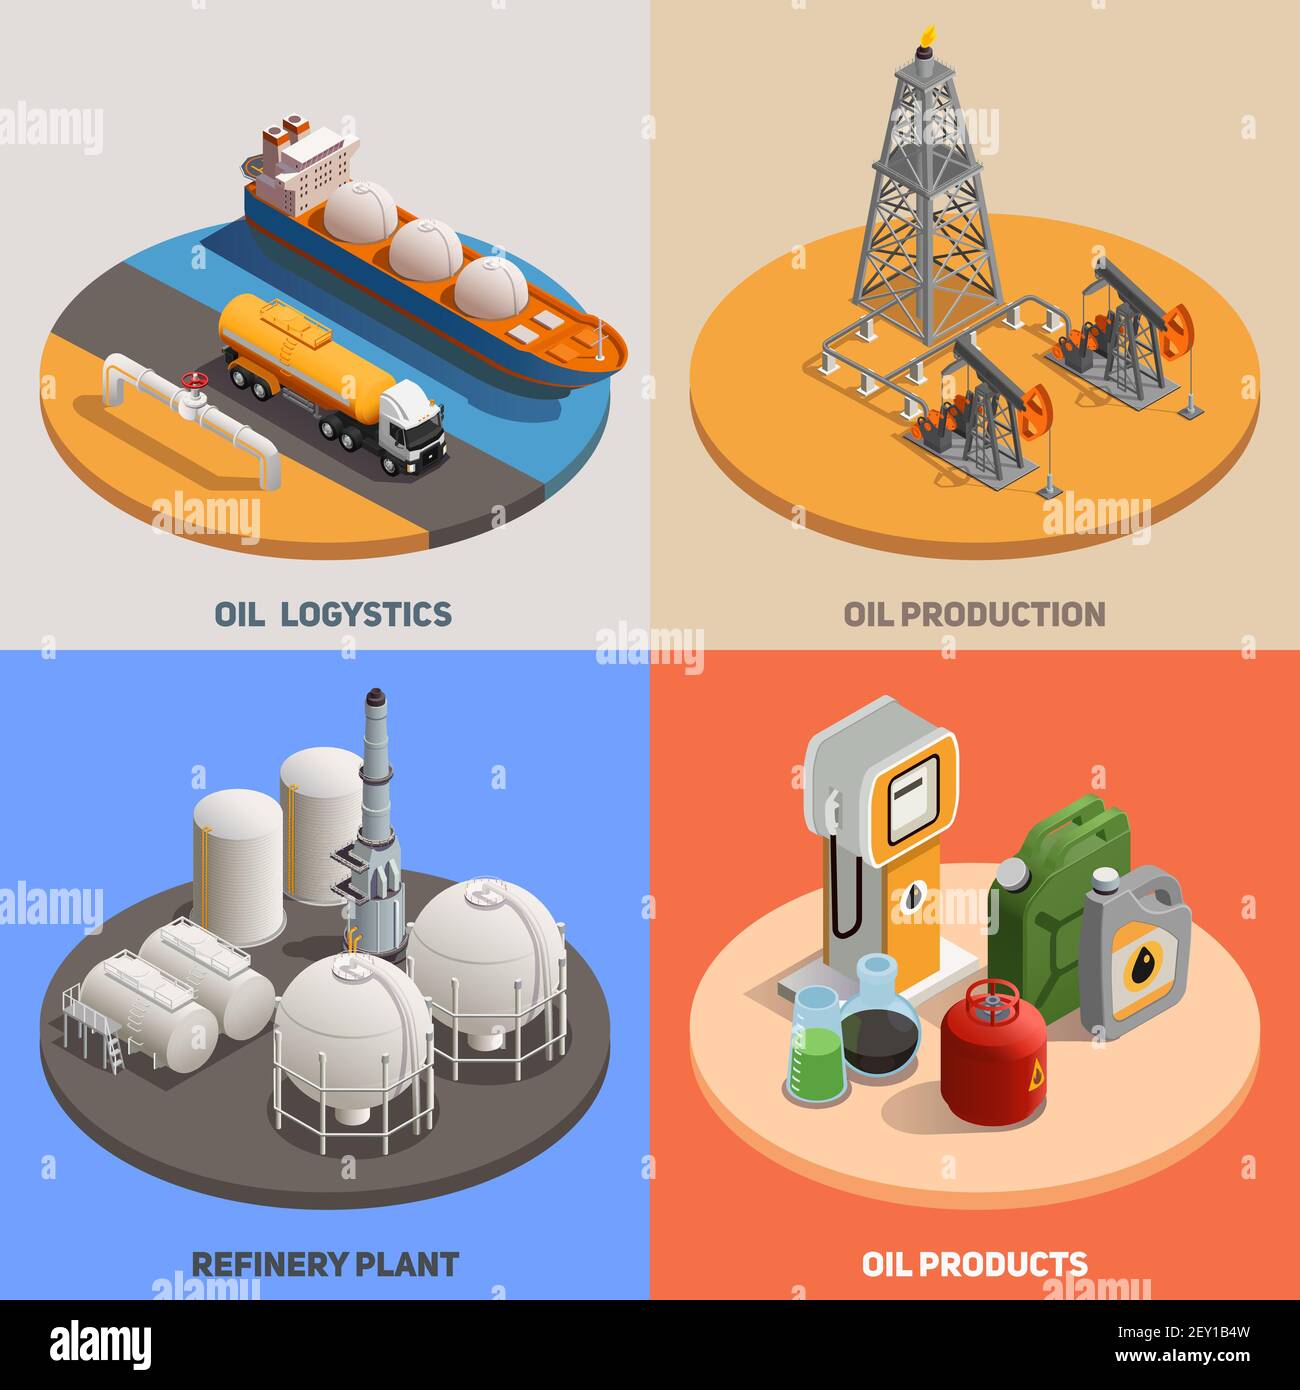 Oil production logistics refinery plant 4 isometric colorful background icons square  petroleum industry concept isolated vector illustration Stock Vector